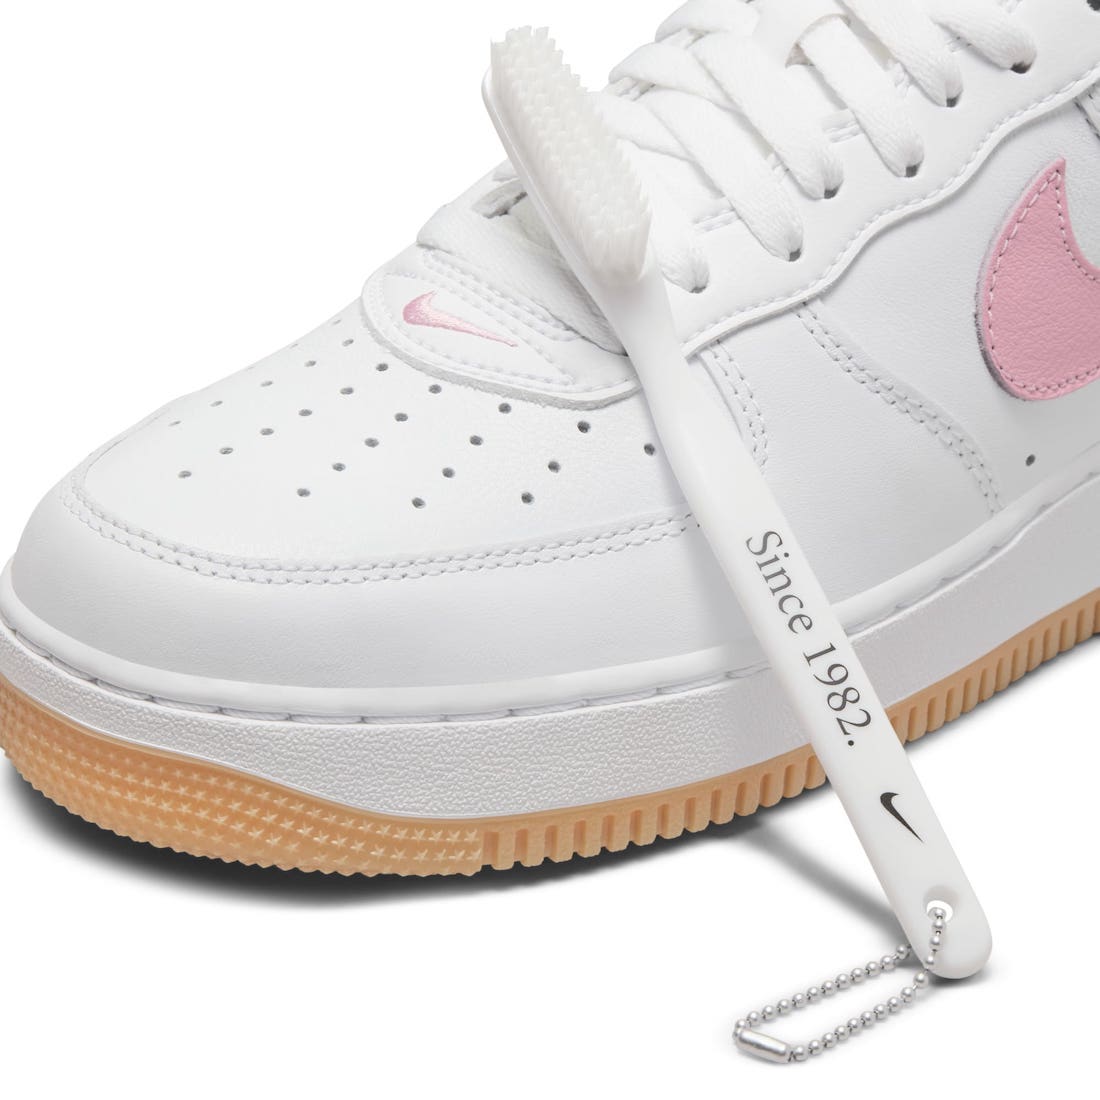 Nike Air Force 1 Since 82 White Pink Gum DM0576-101 Release Date